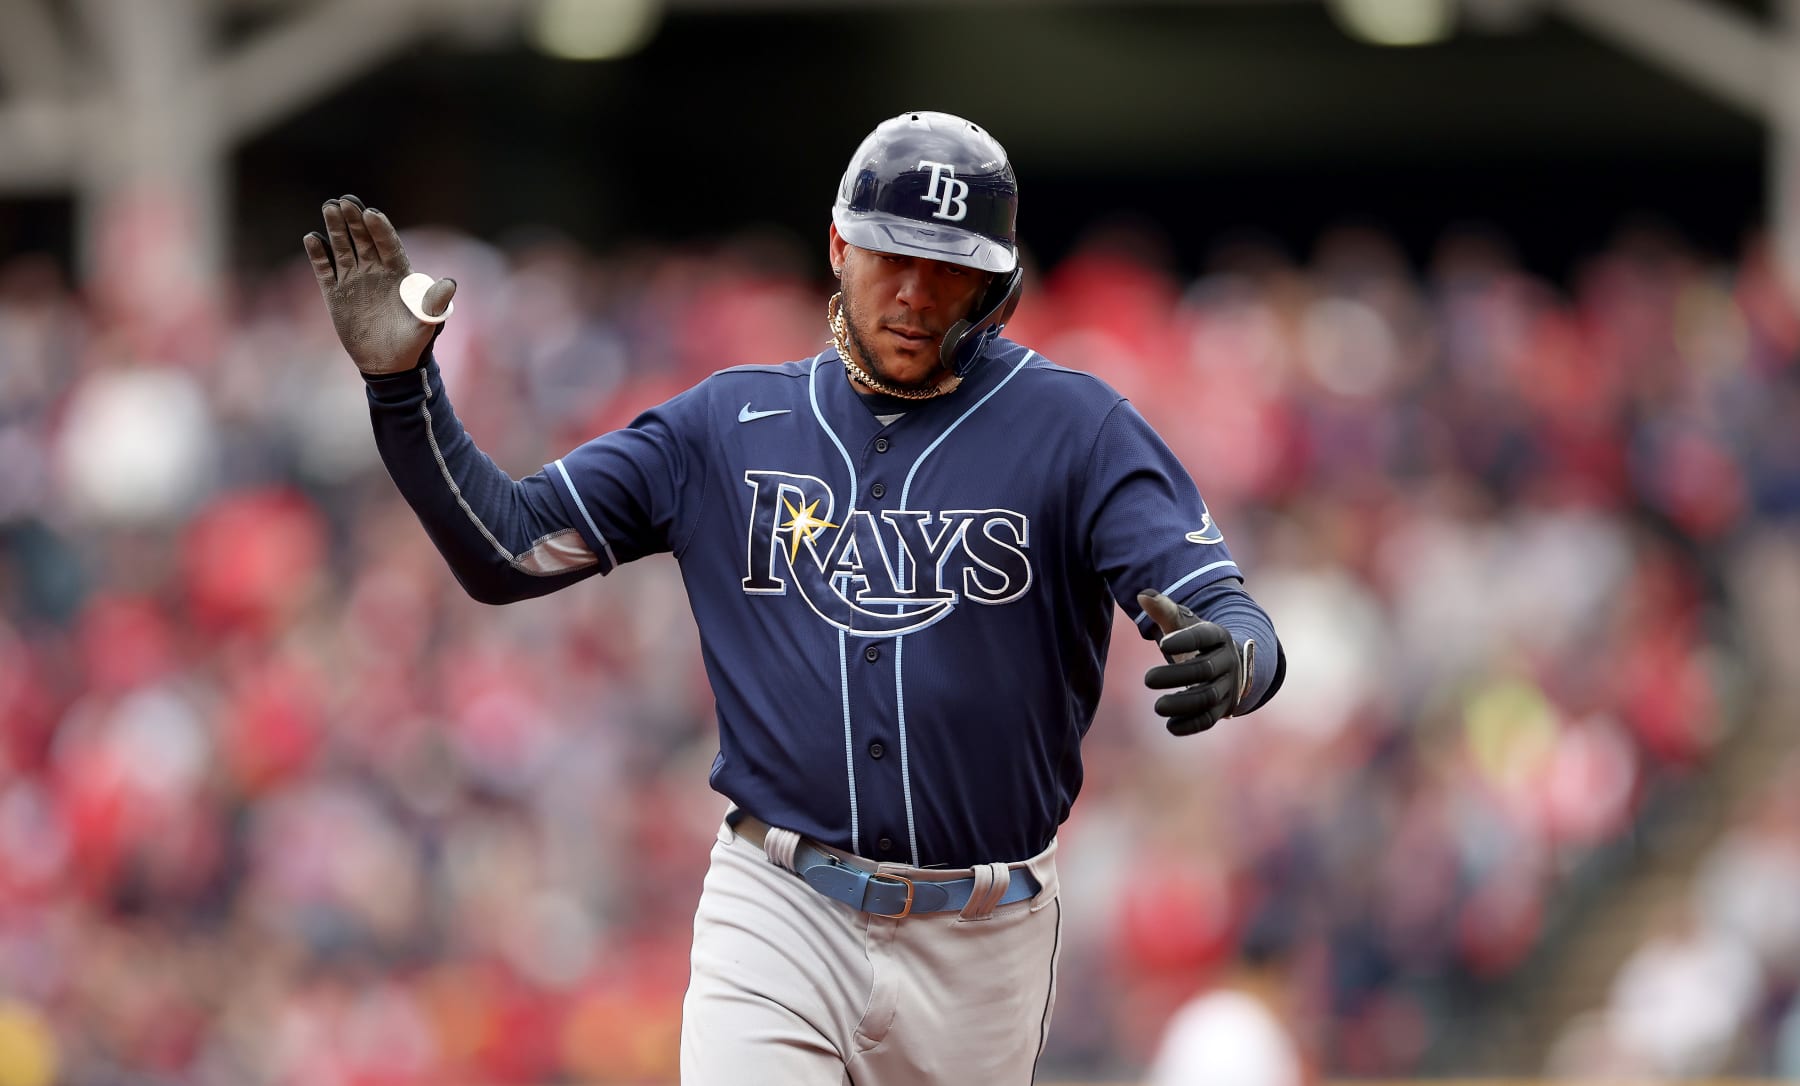 Rays get back on track, rout Royals behind Jose Siri and Zach Eflin